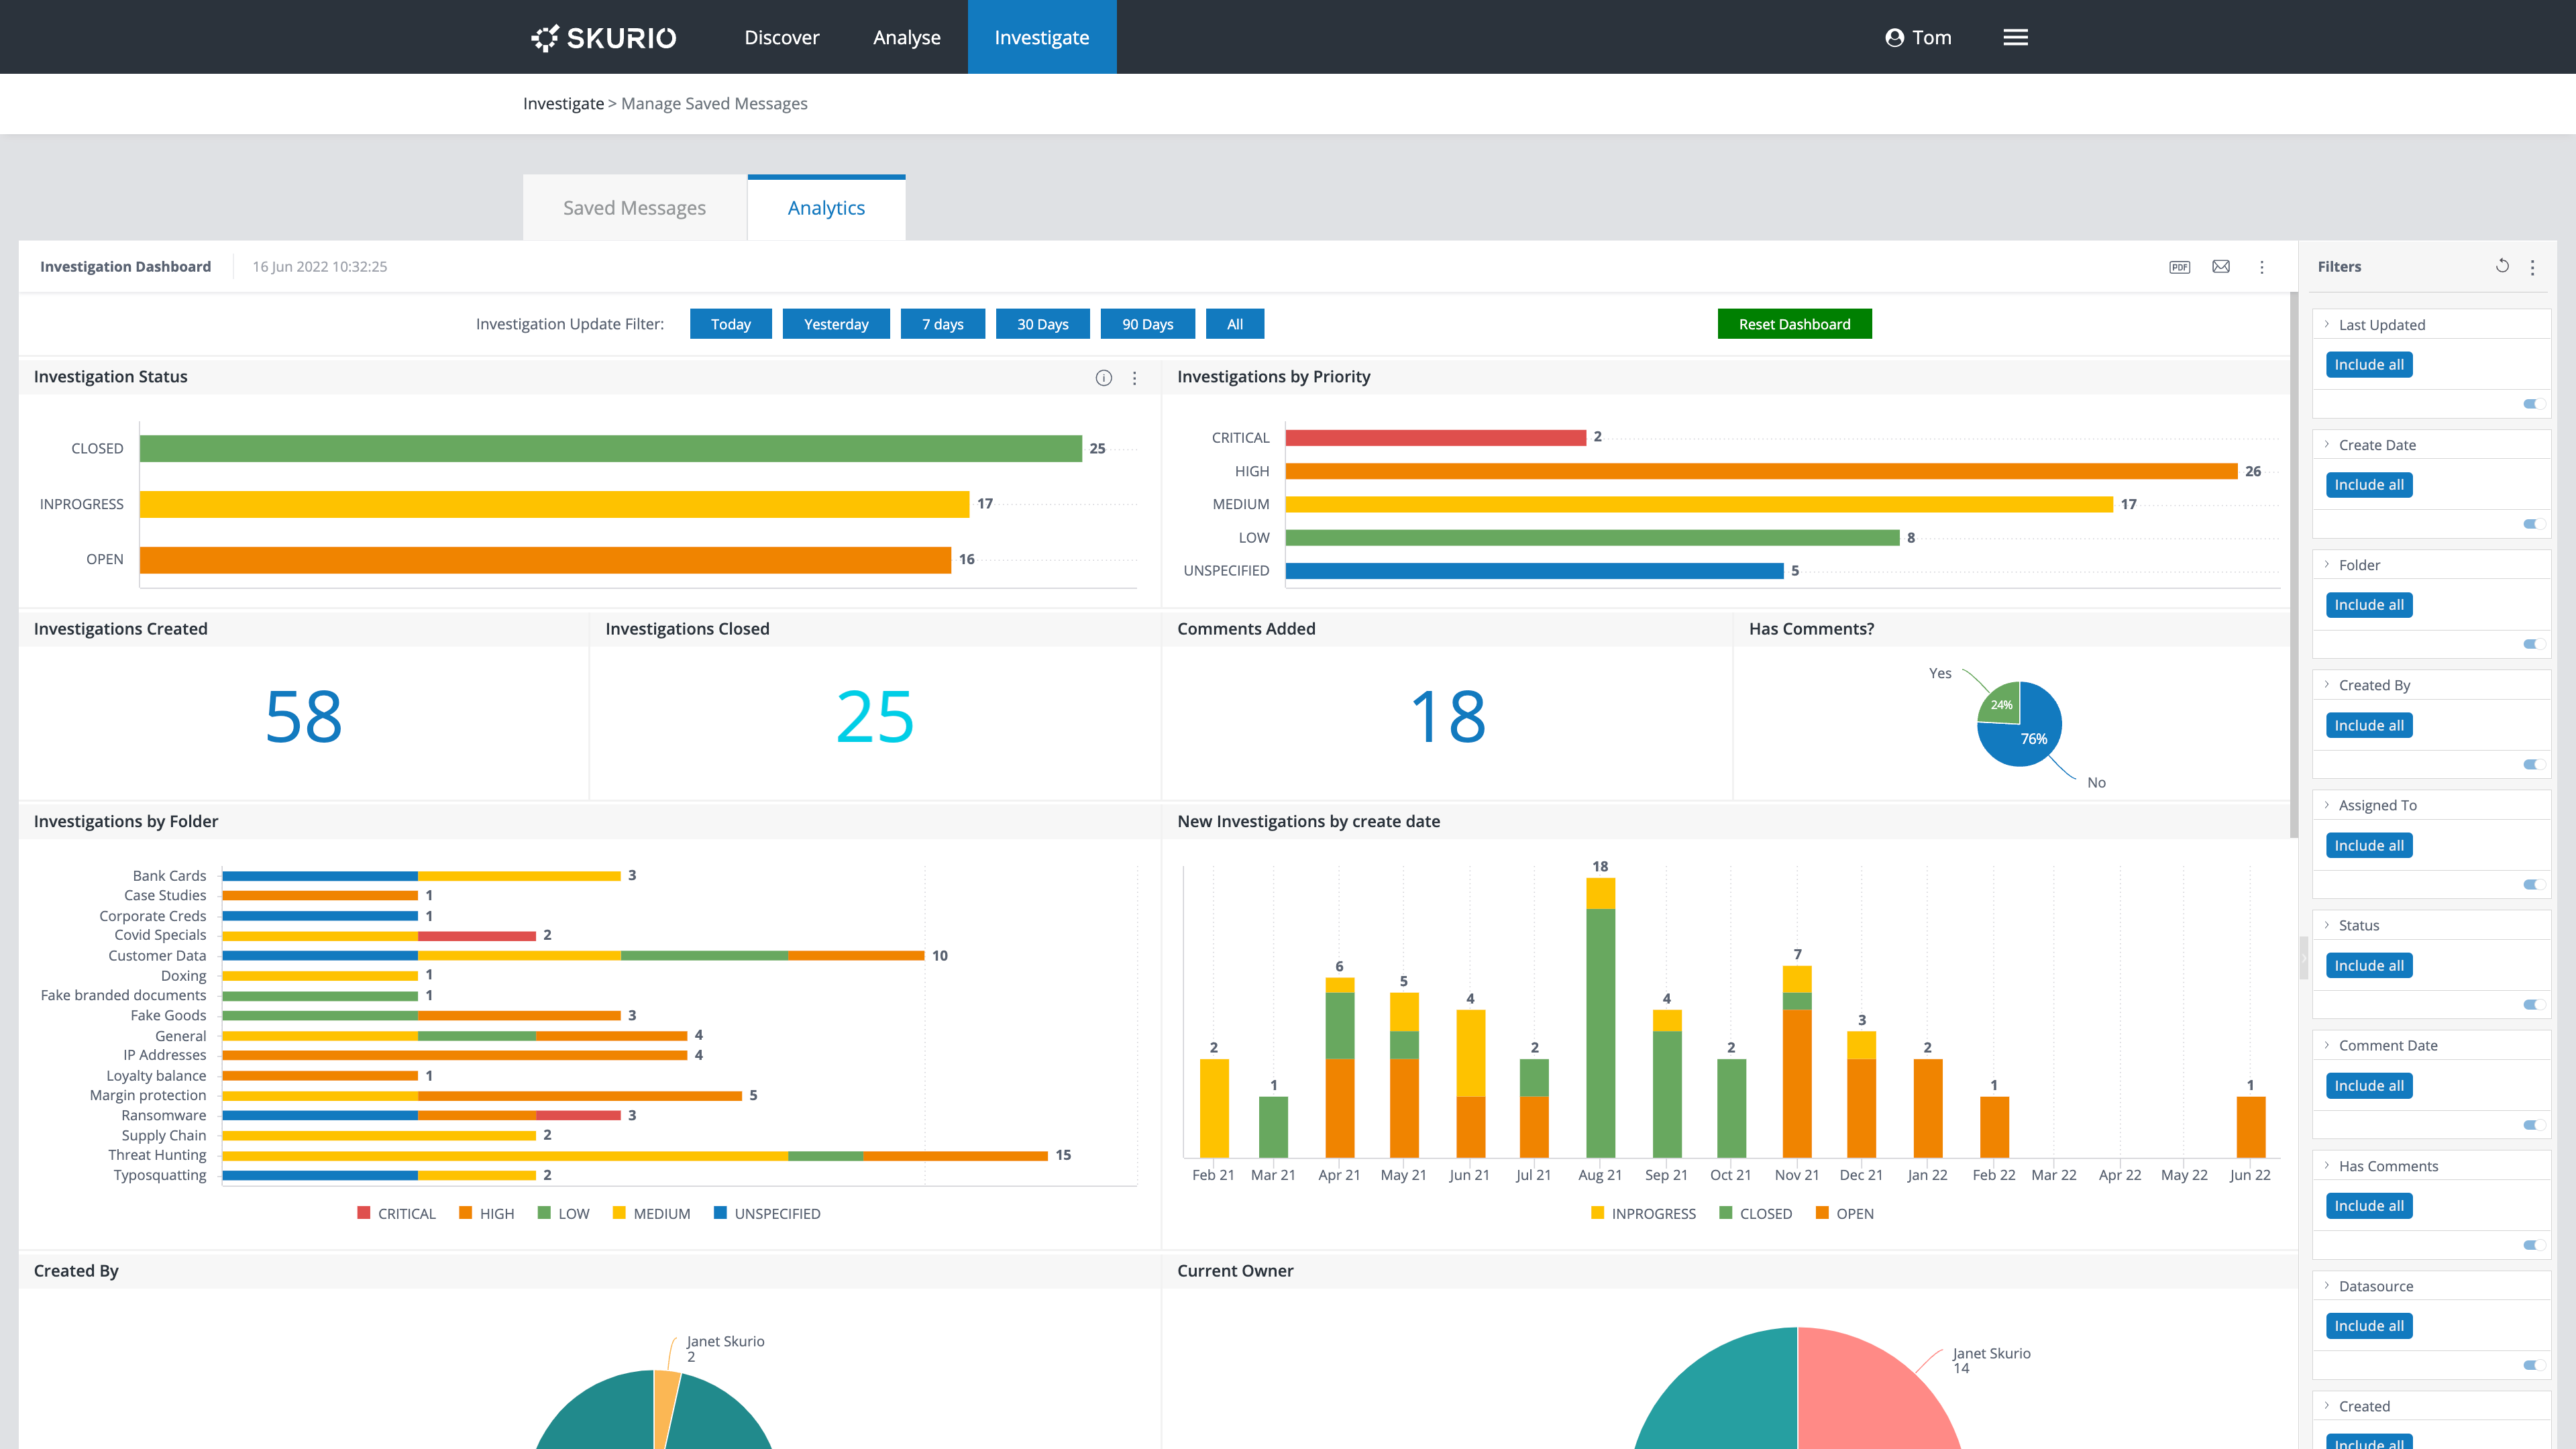 The analytics dashboard shows a summary view of investigations.